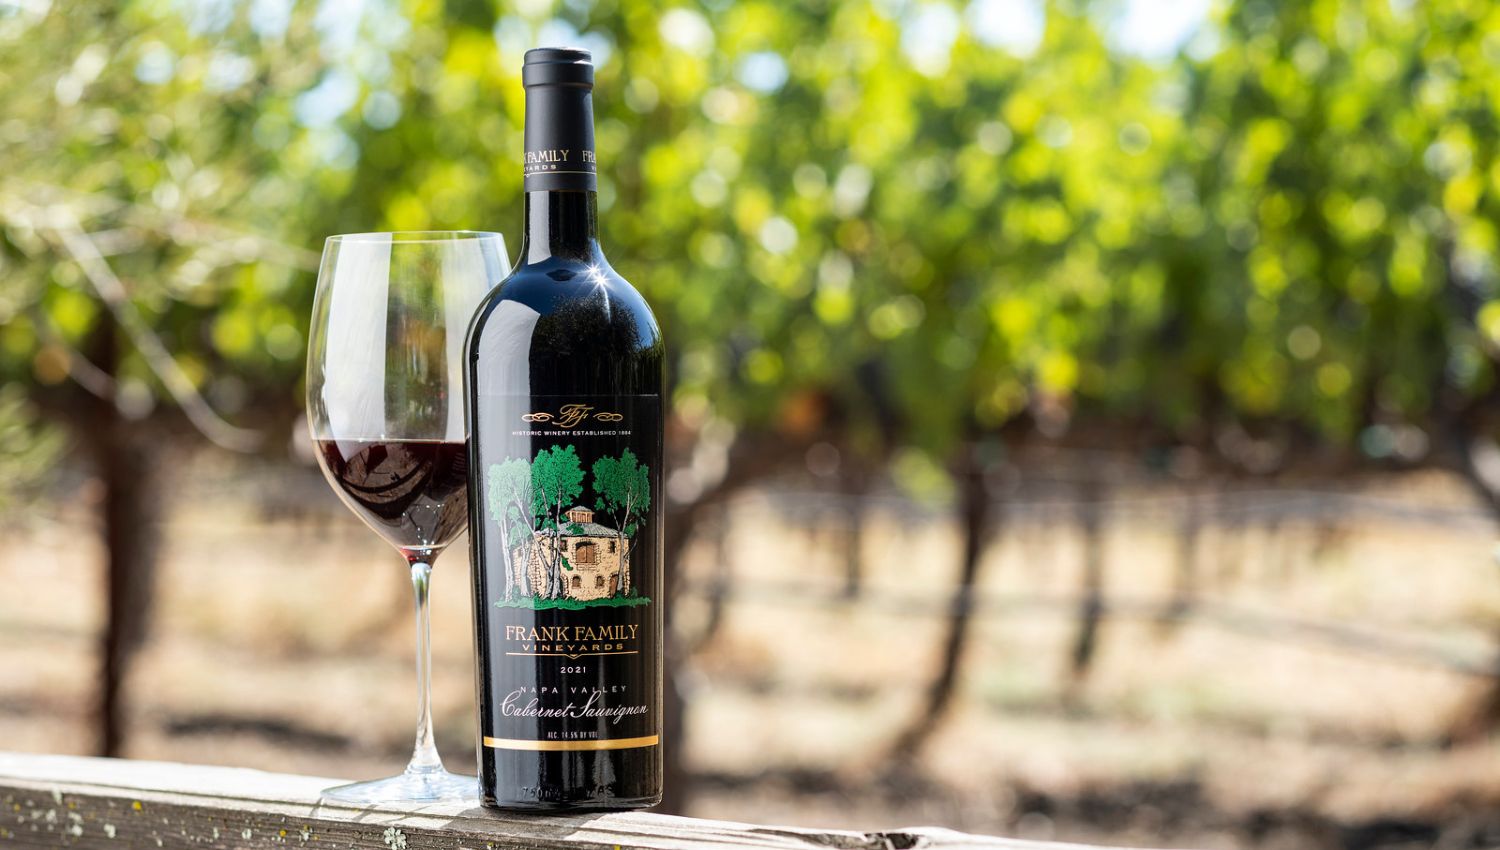 A bottle of Napa Valley Cabernet in the vineyard